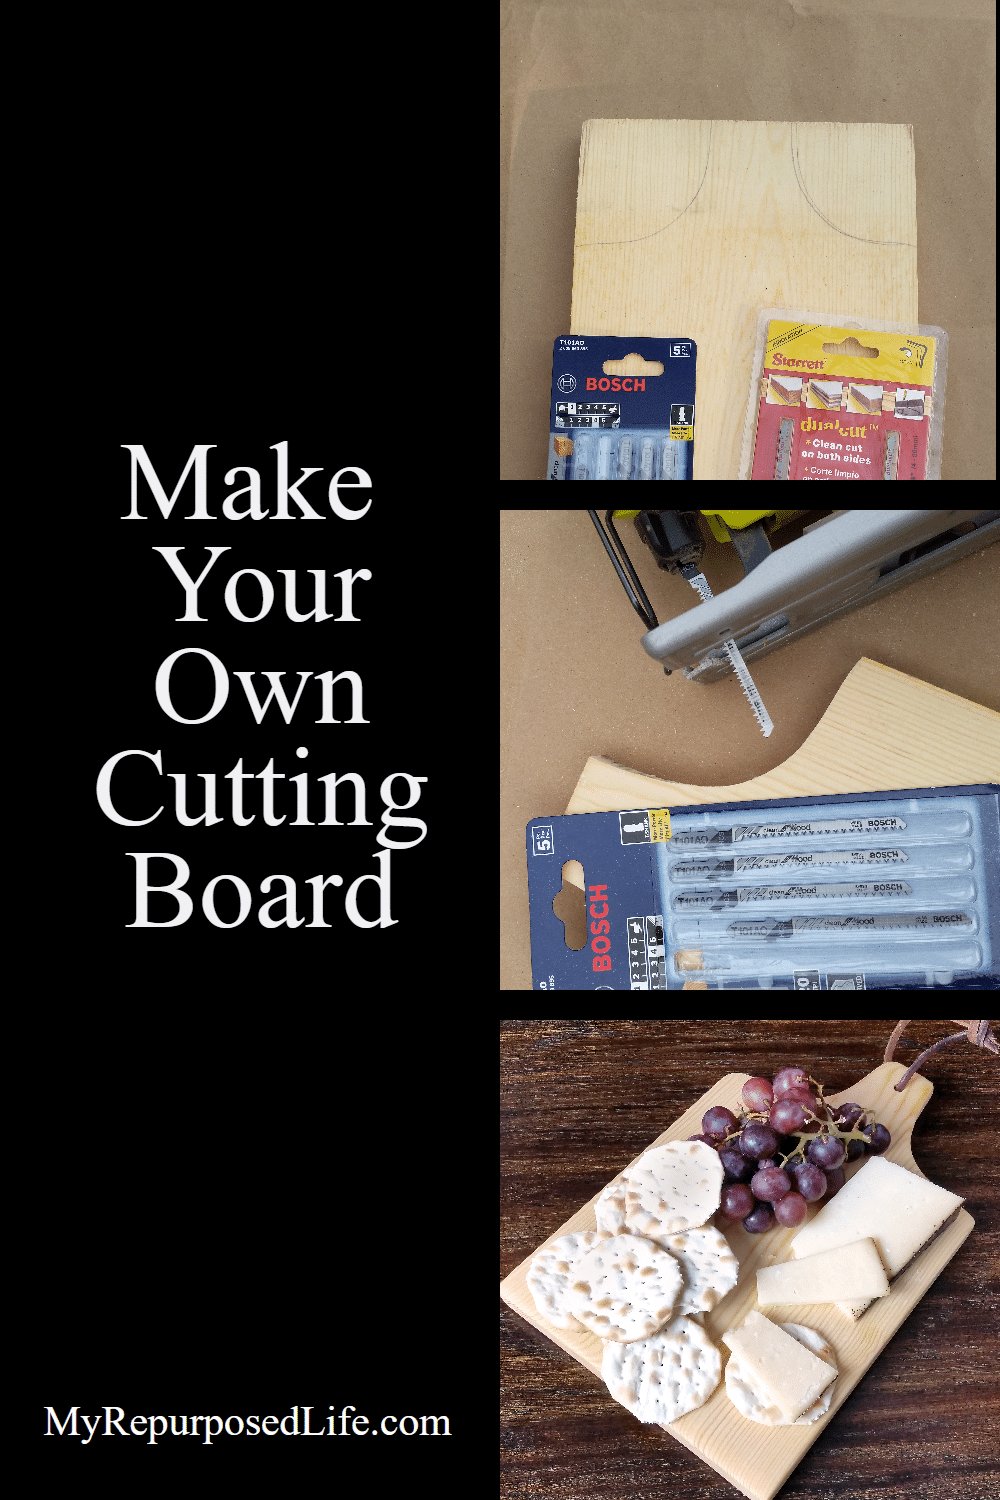 In this diy cutting board tutorial, there are lots of tips for using a jigsaw, even for a beginner. Why a jigsaw should be your first saw. via @repurposedlife